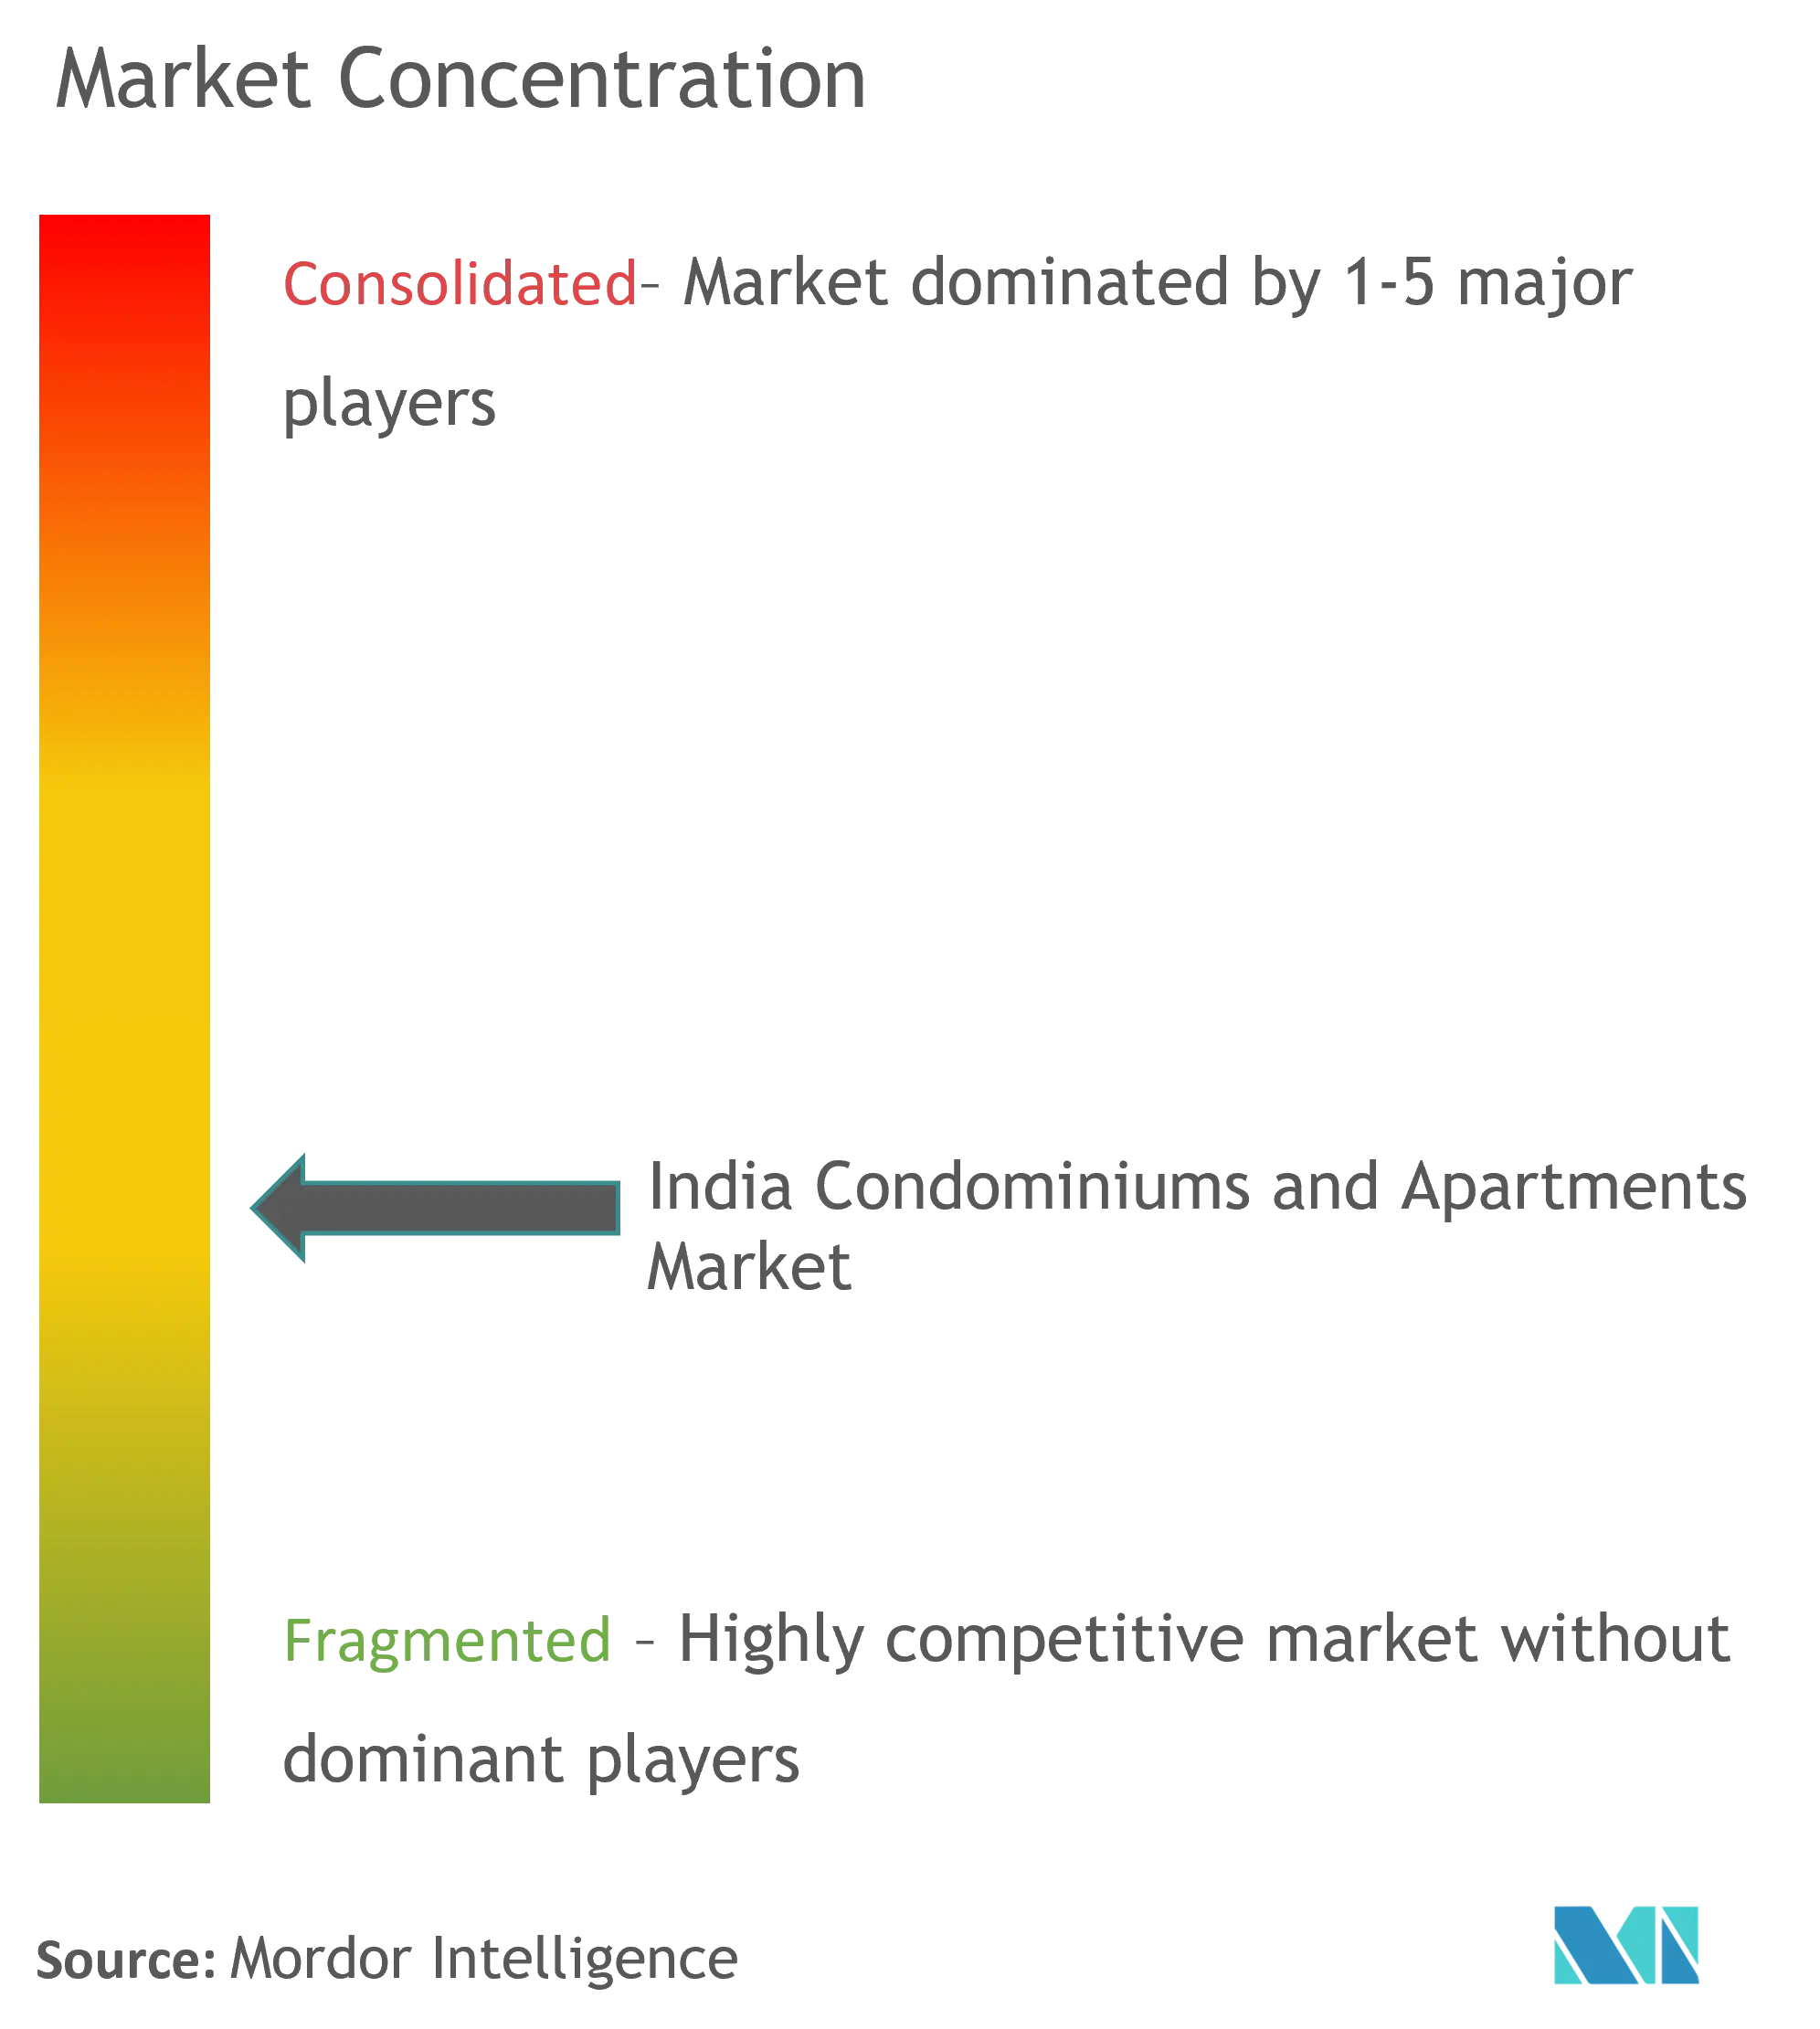 Keyplayers and Market Concentration Chart template (3).jpg